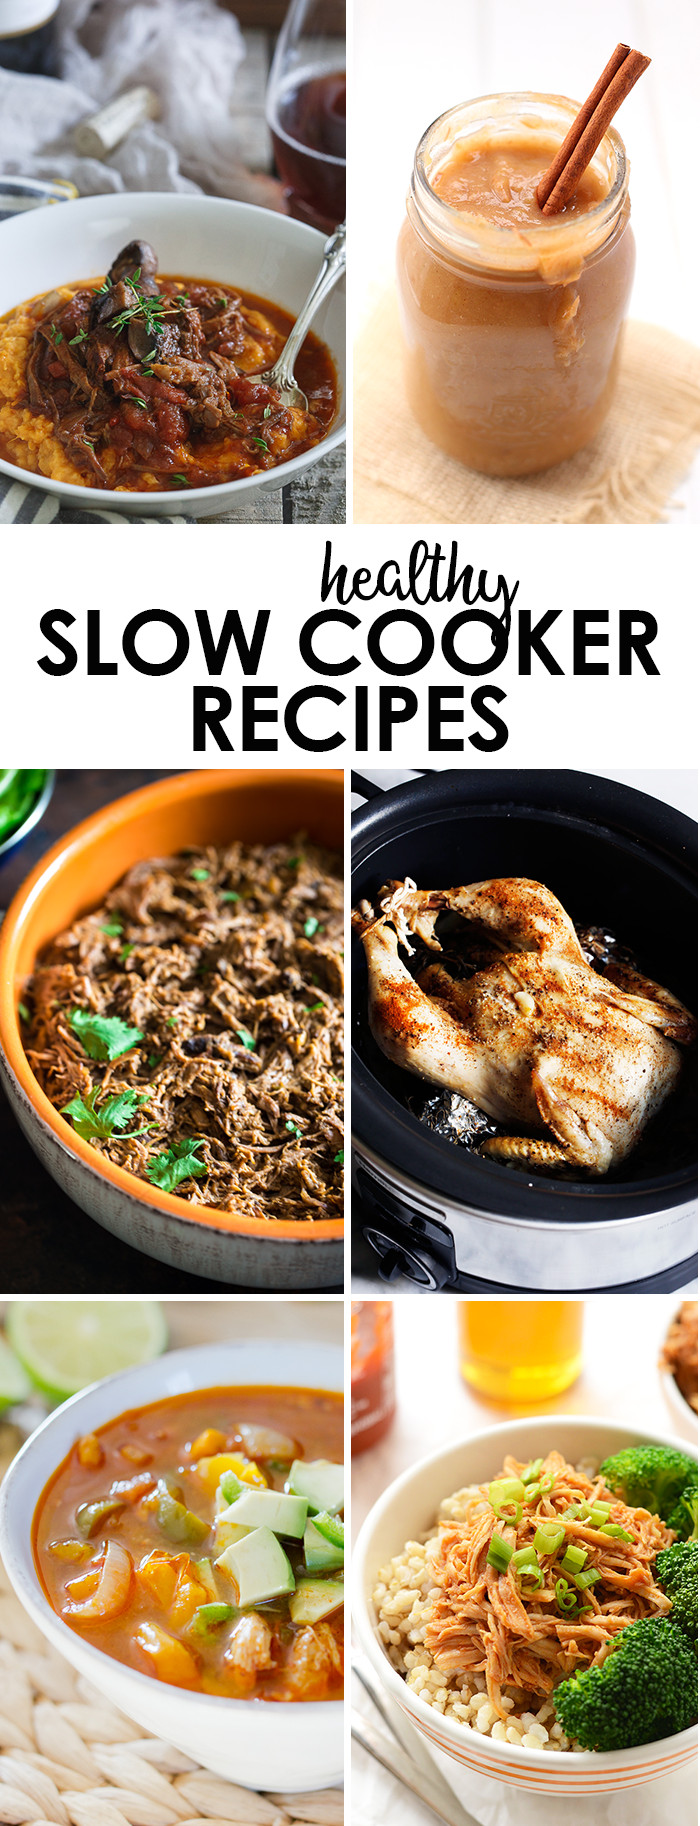 Easy Chicken Slow Cooker Recipes Healthy
 5 Ingre nt Honey Sriracha Slow Cooker Chicken Fit